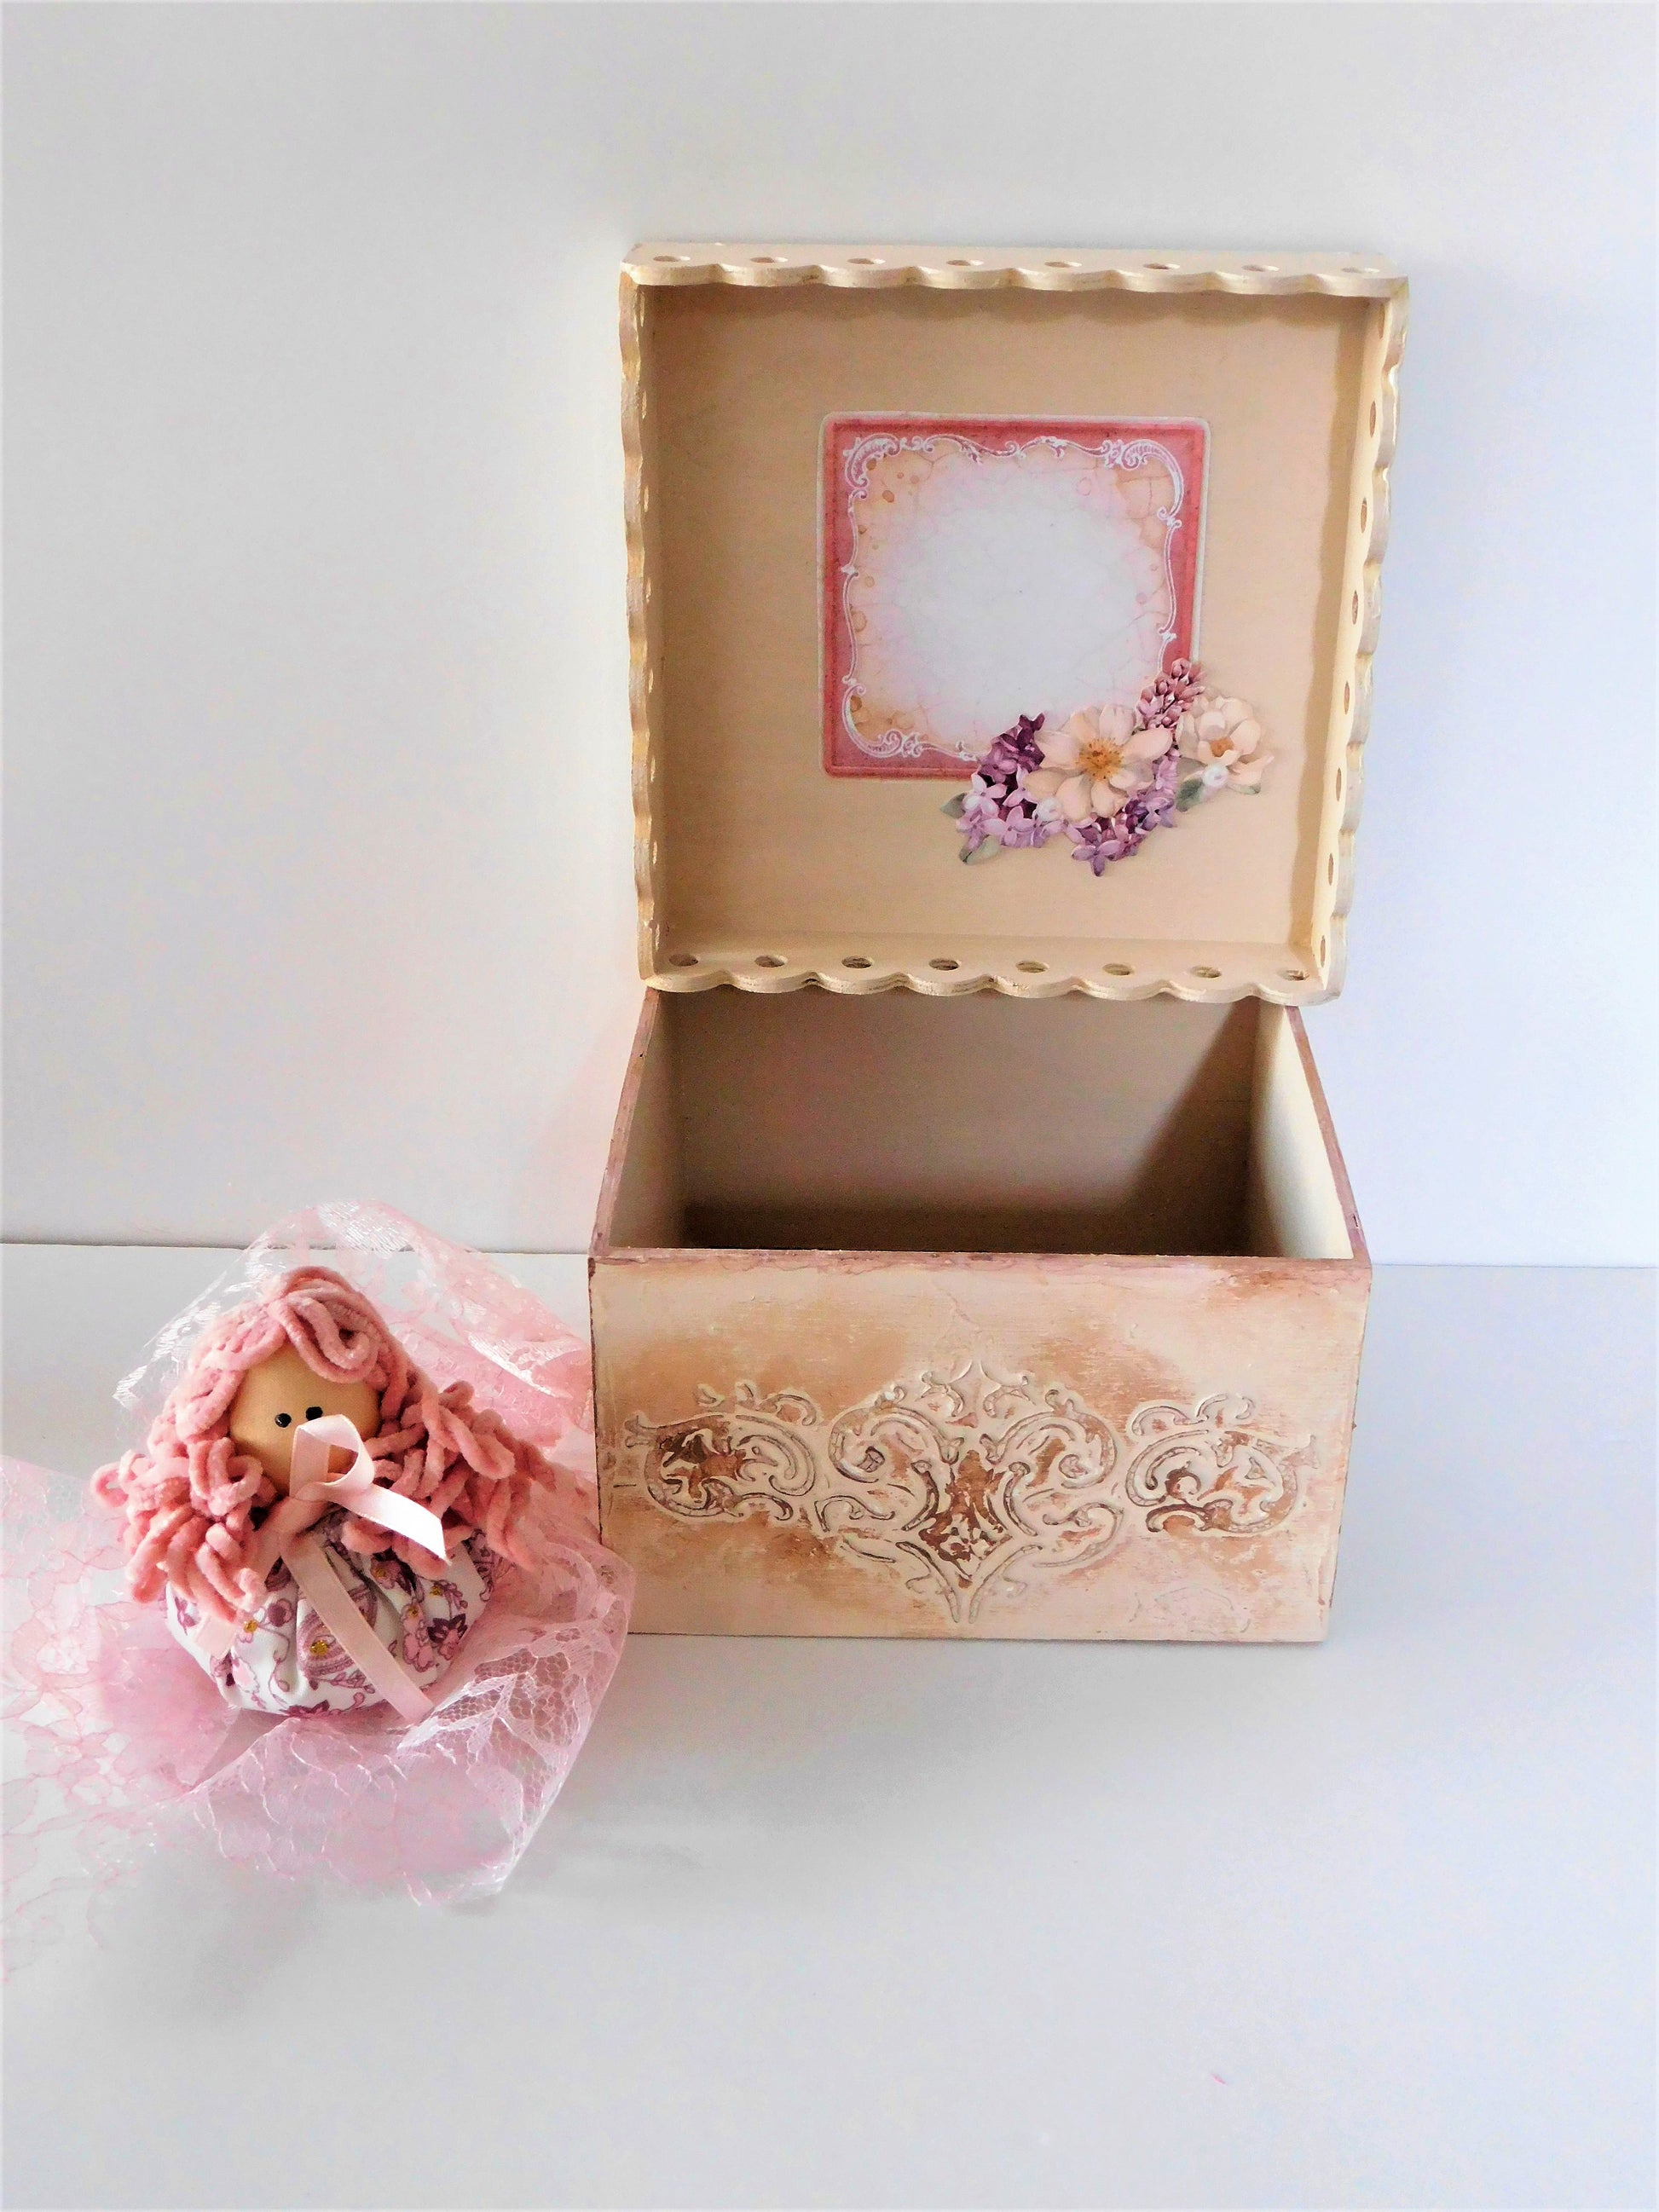 mother's day gift box